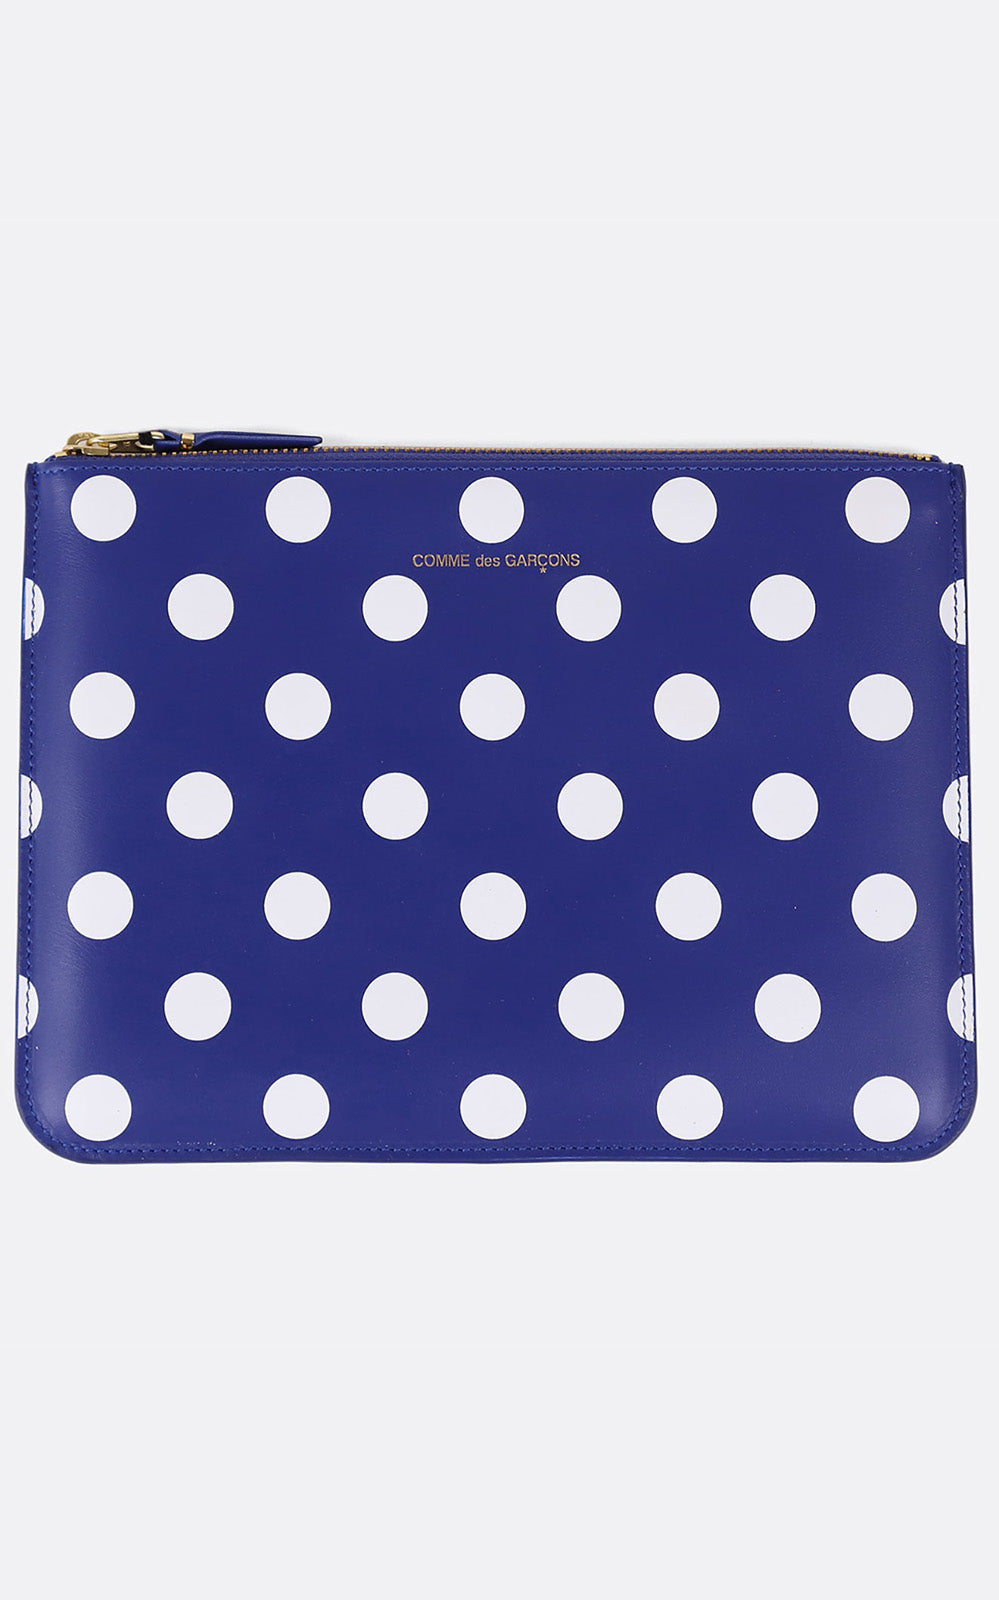 WALLET / BIG POUCH DOT LEATHER NAVY